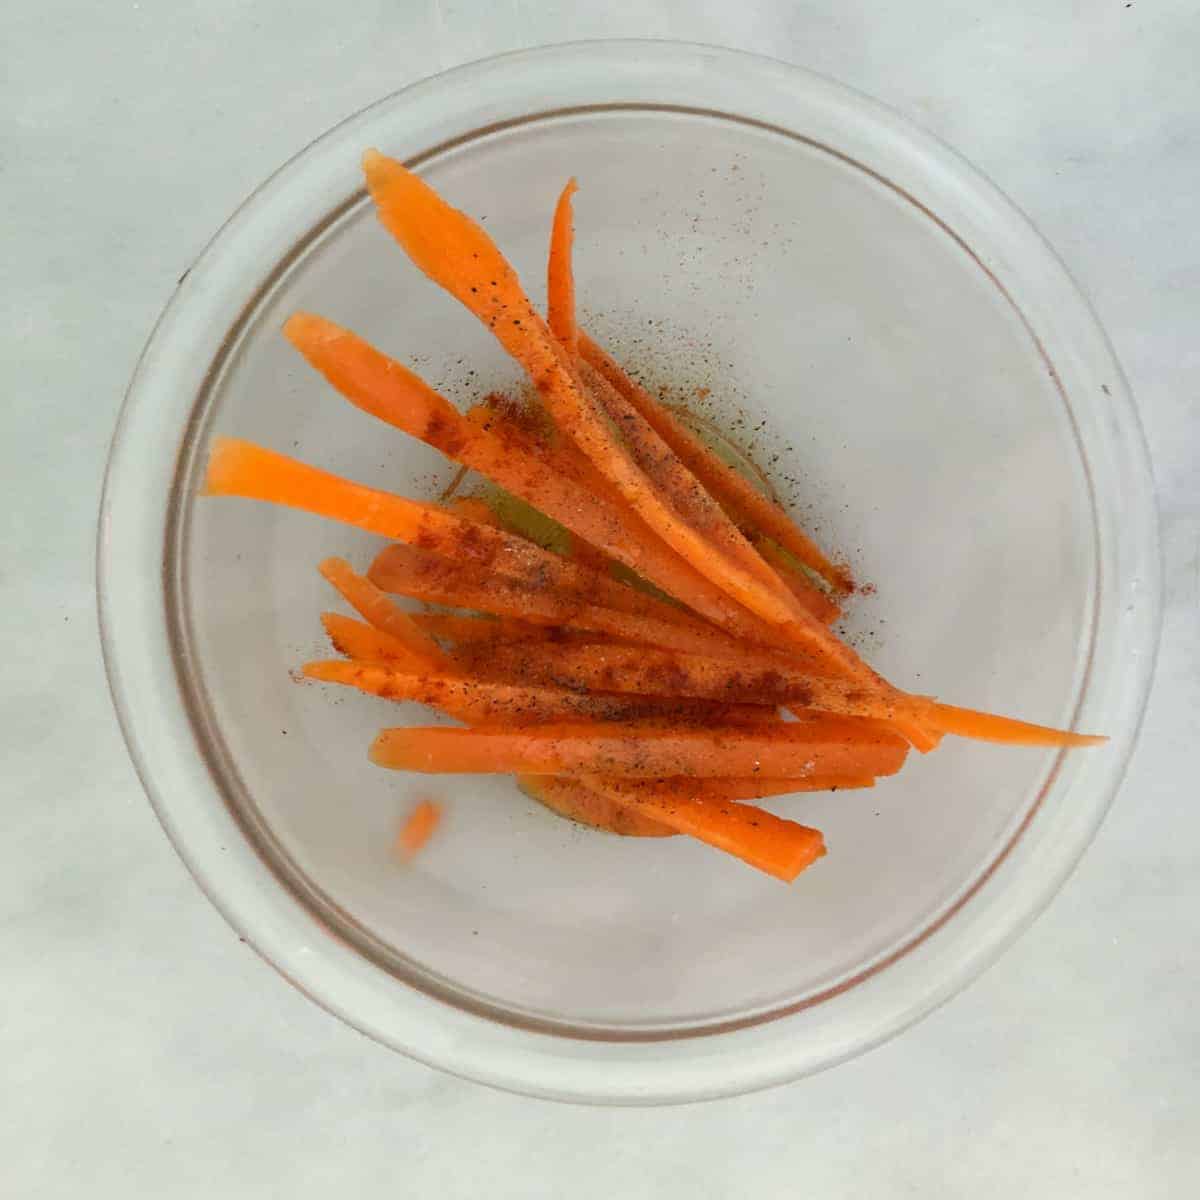 Raw sliced carrots in bowl.